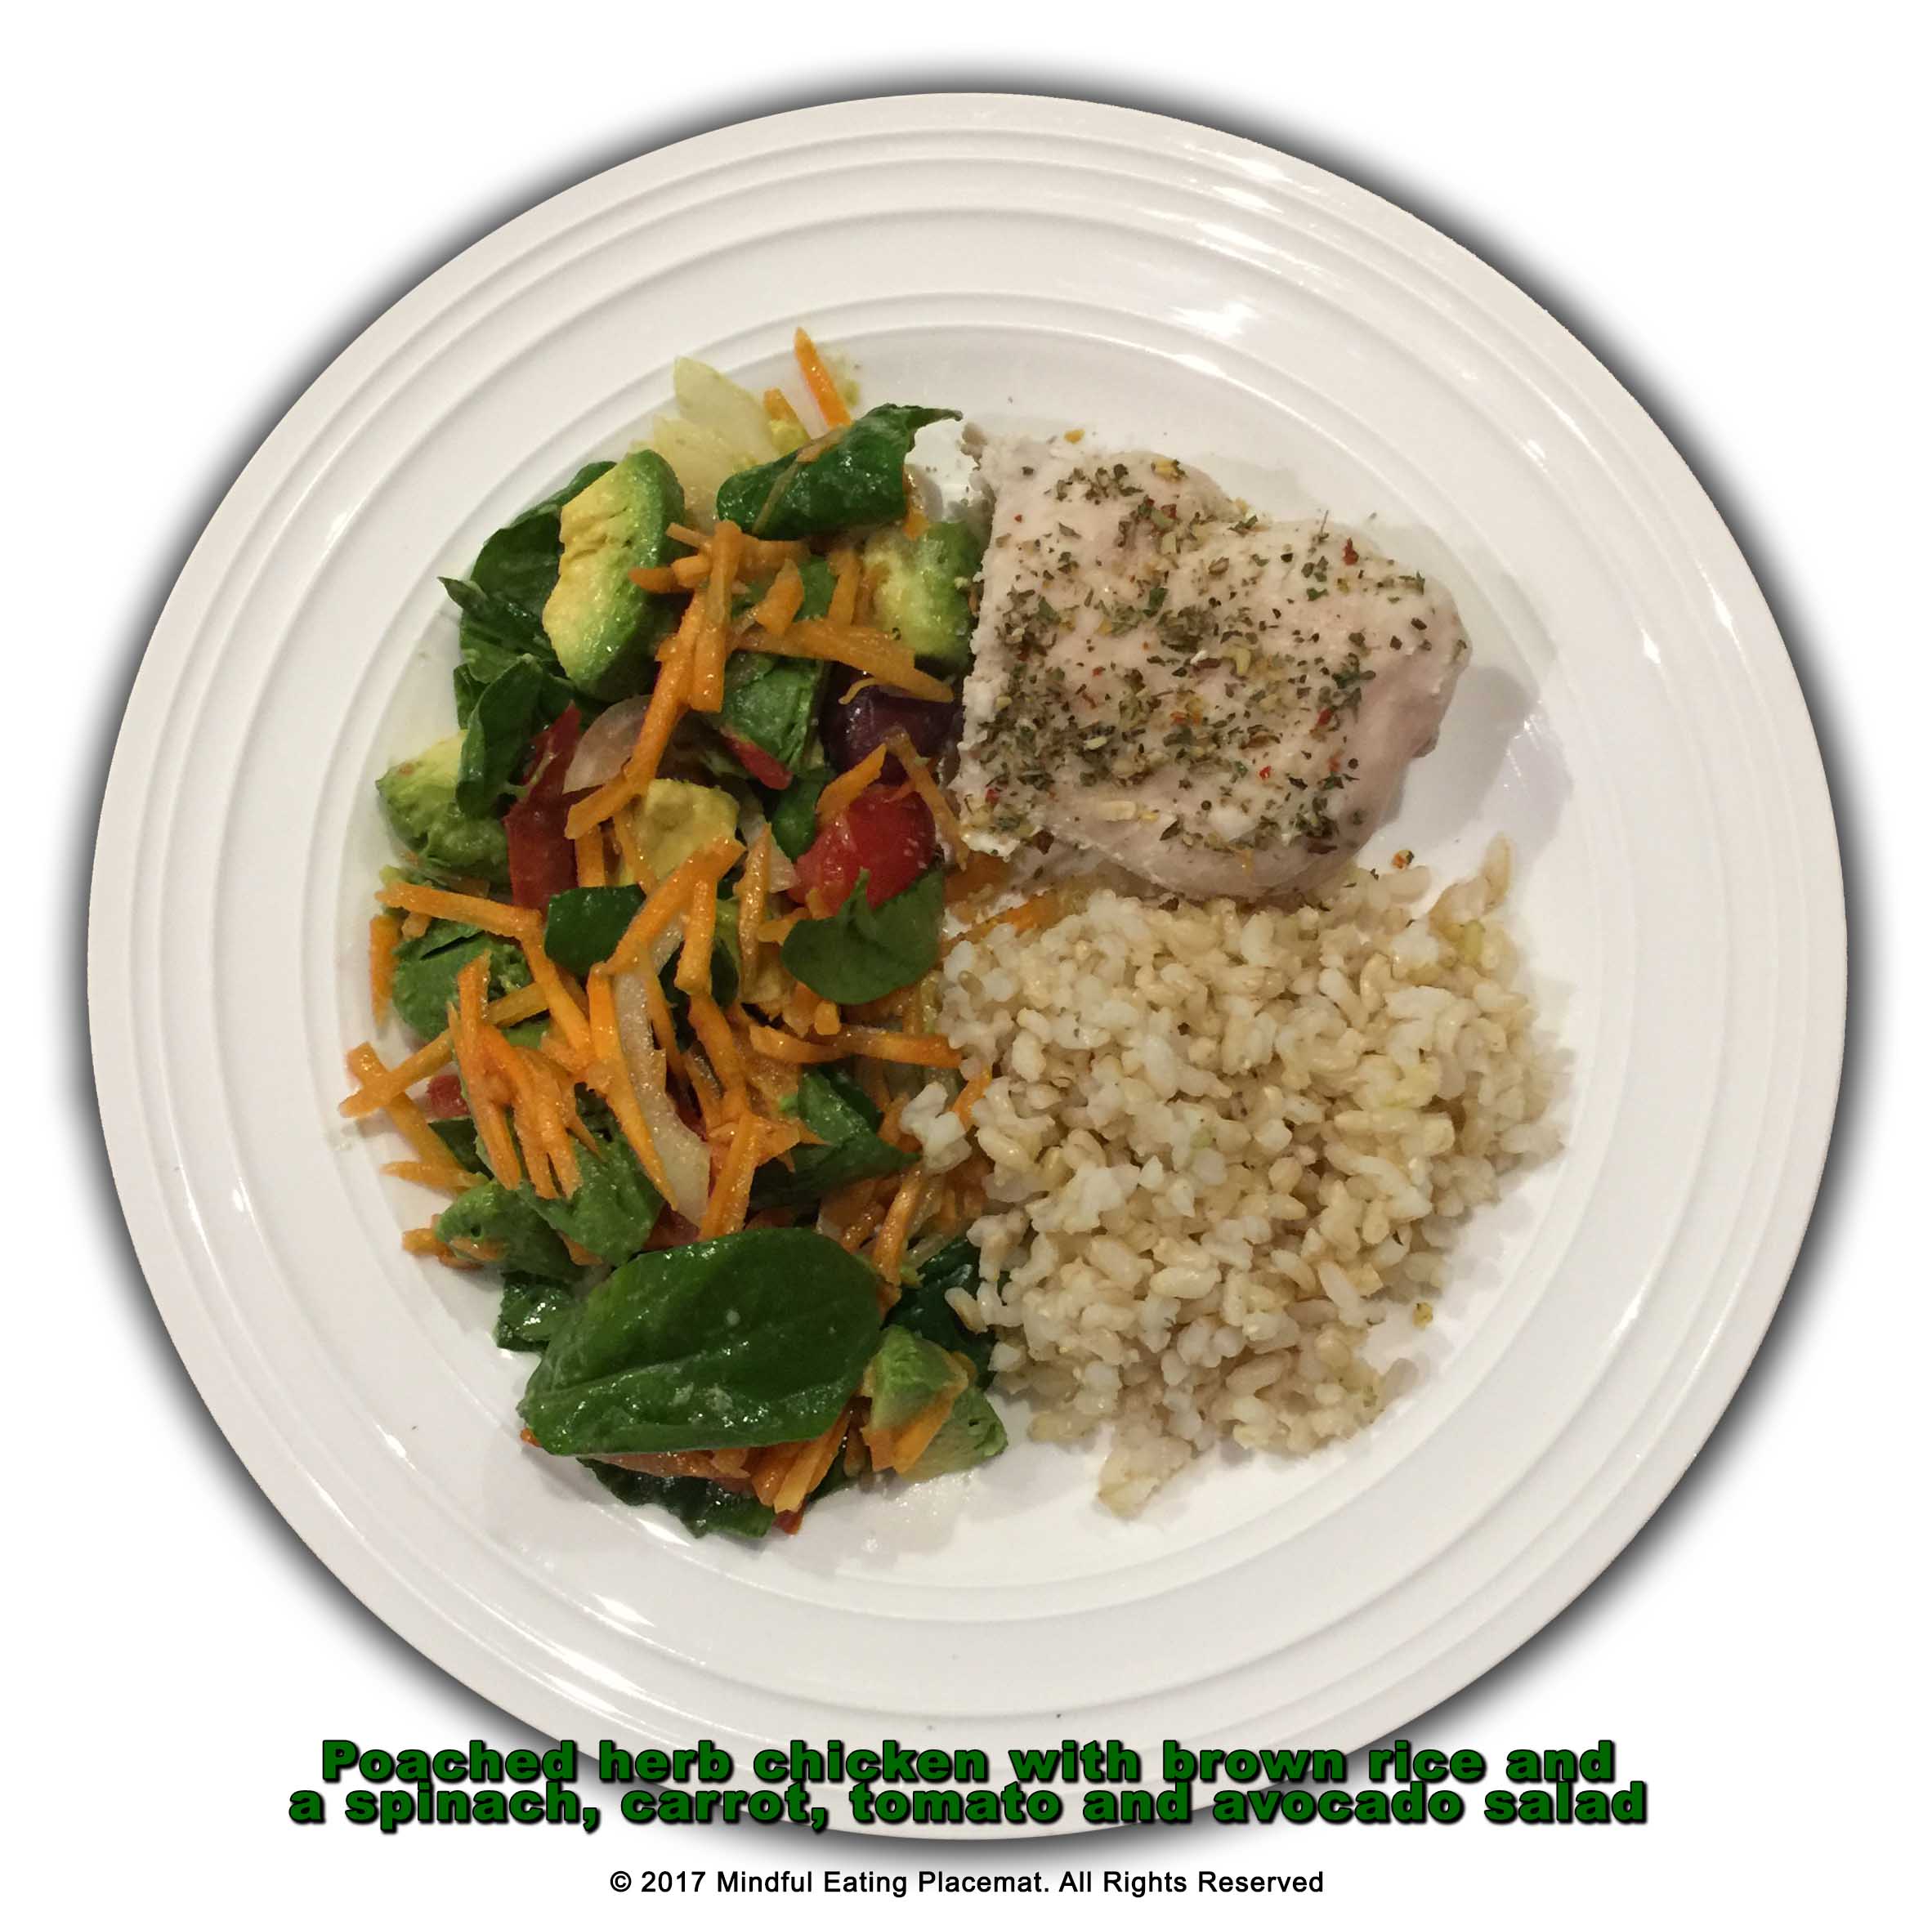 Poached chicken with brown rice and side salad